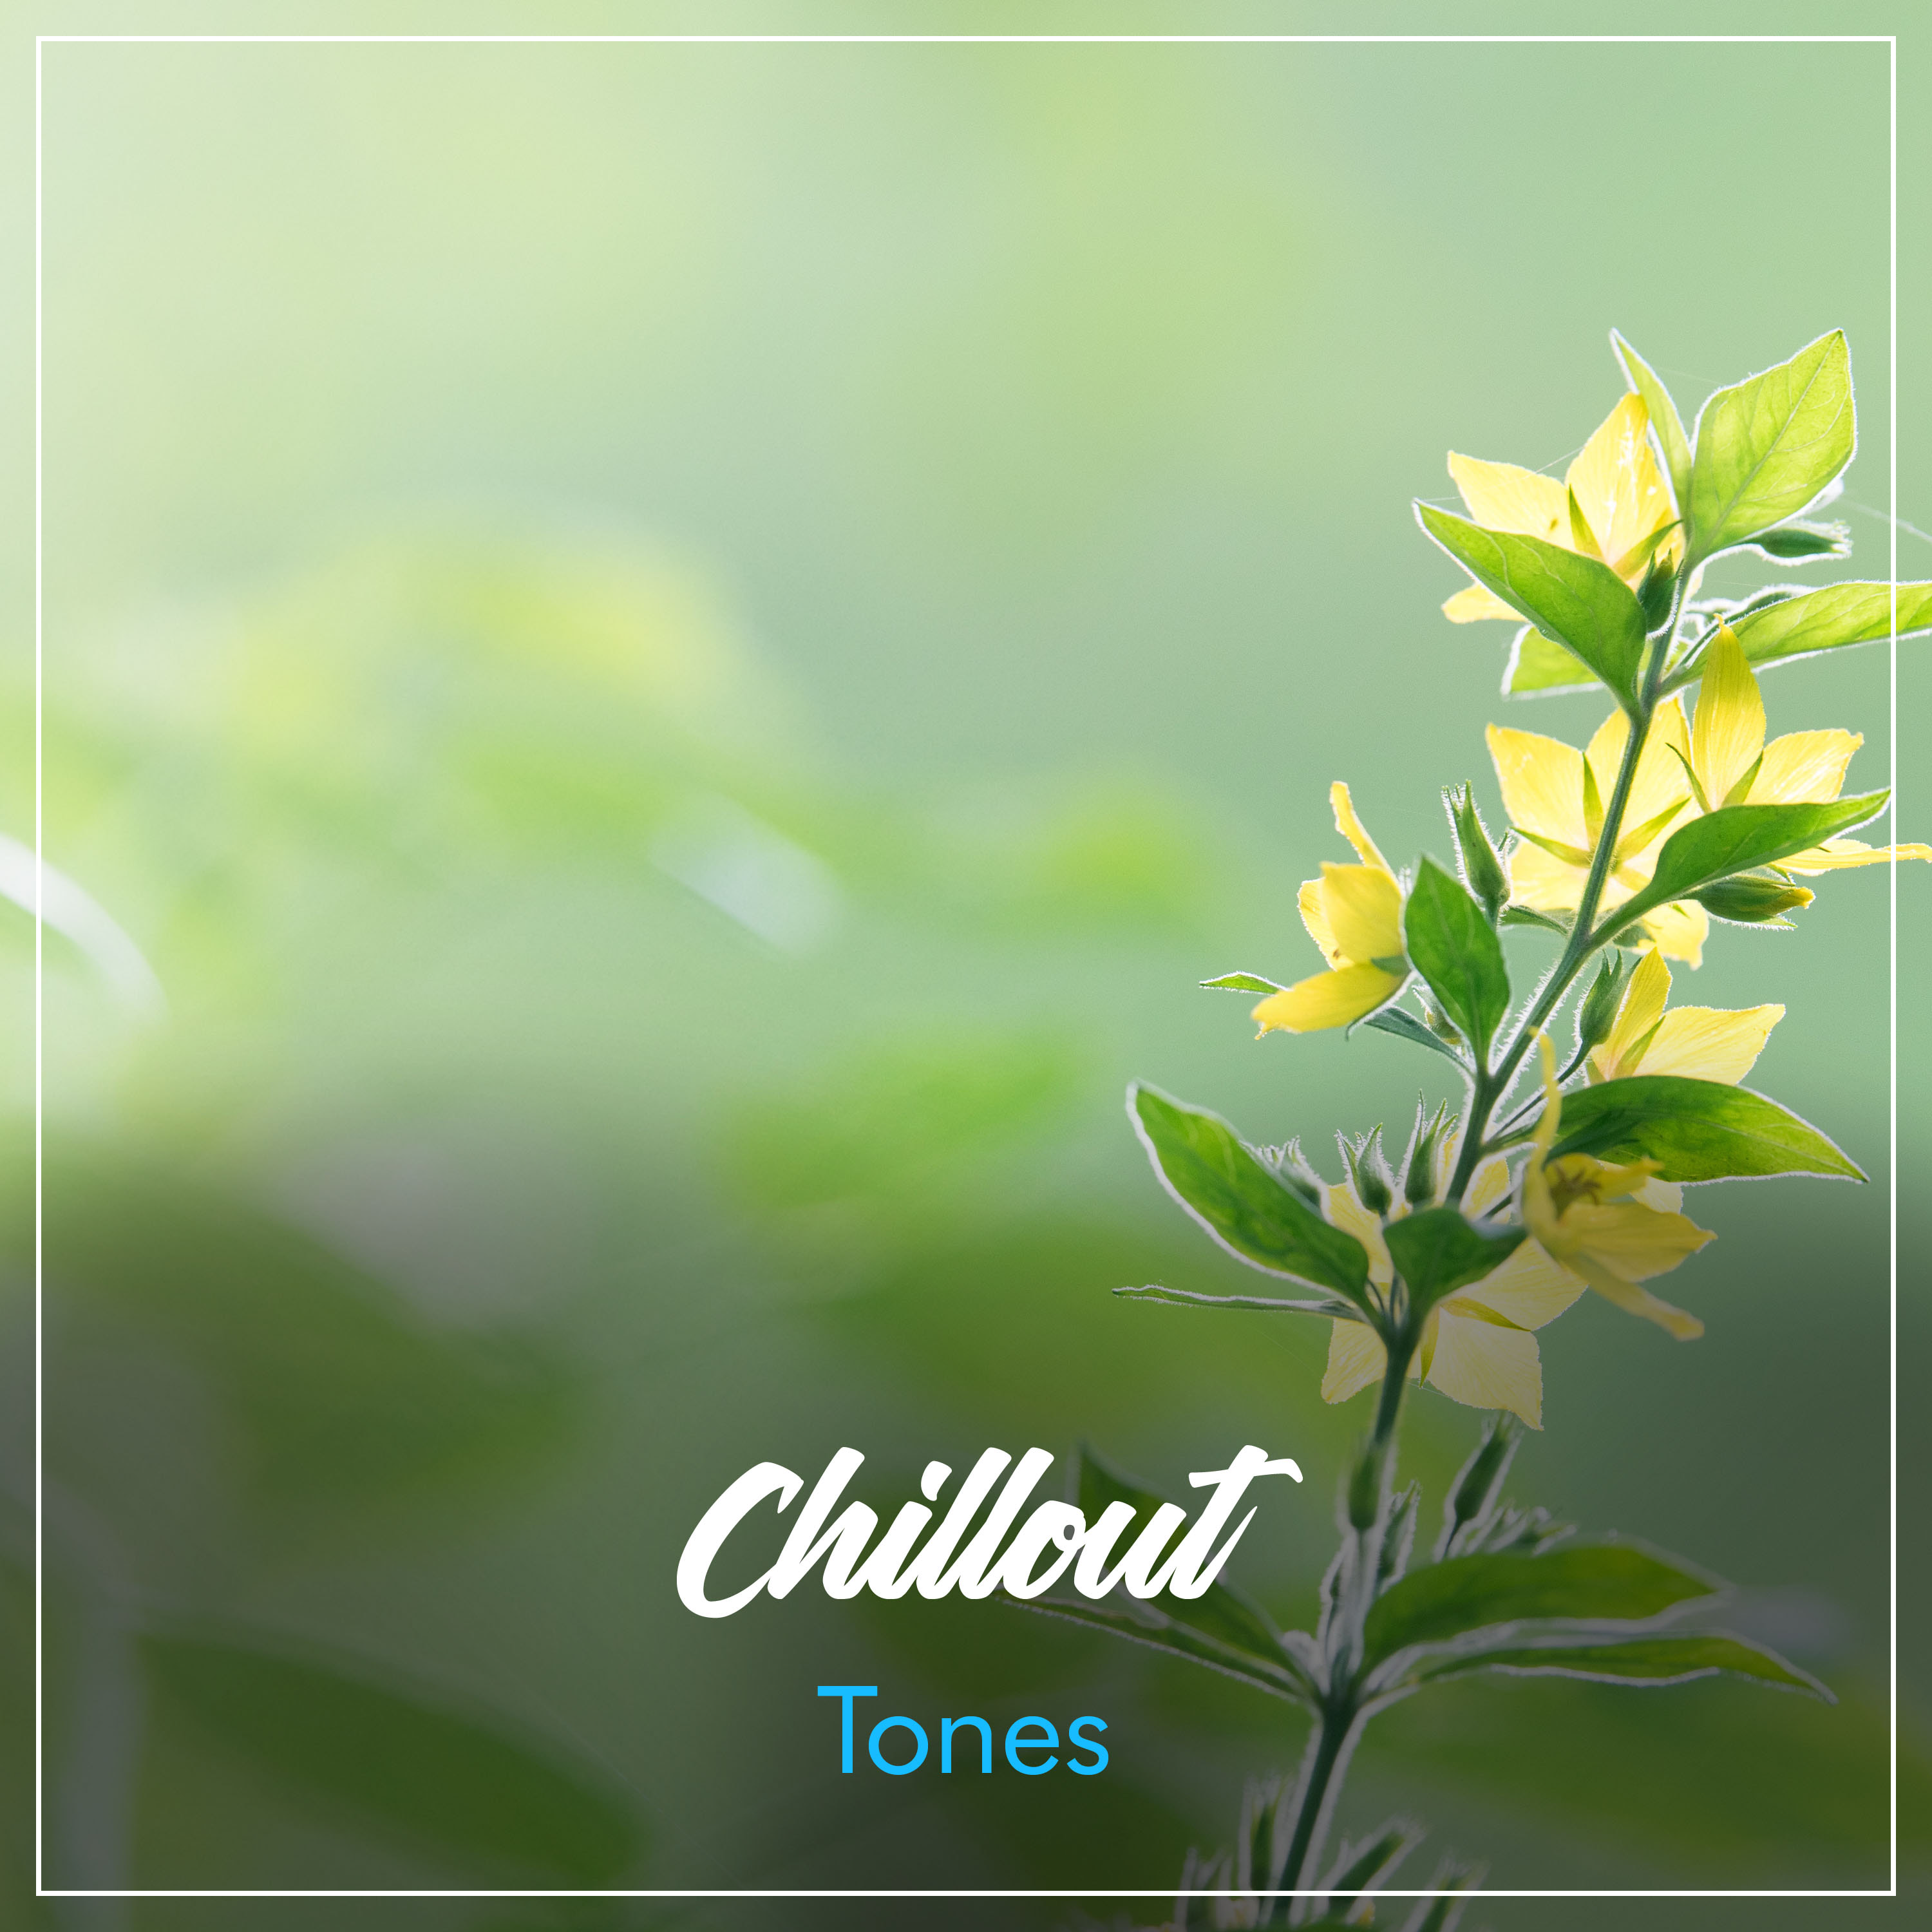 #10 Chillout Tones for a Deep Sleep